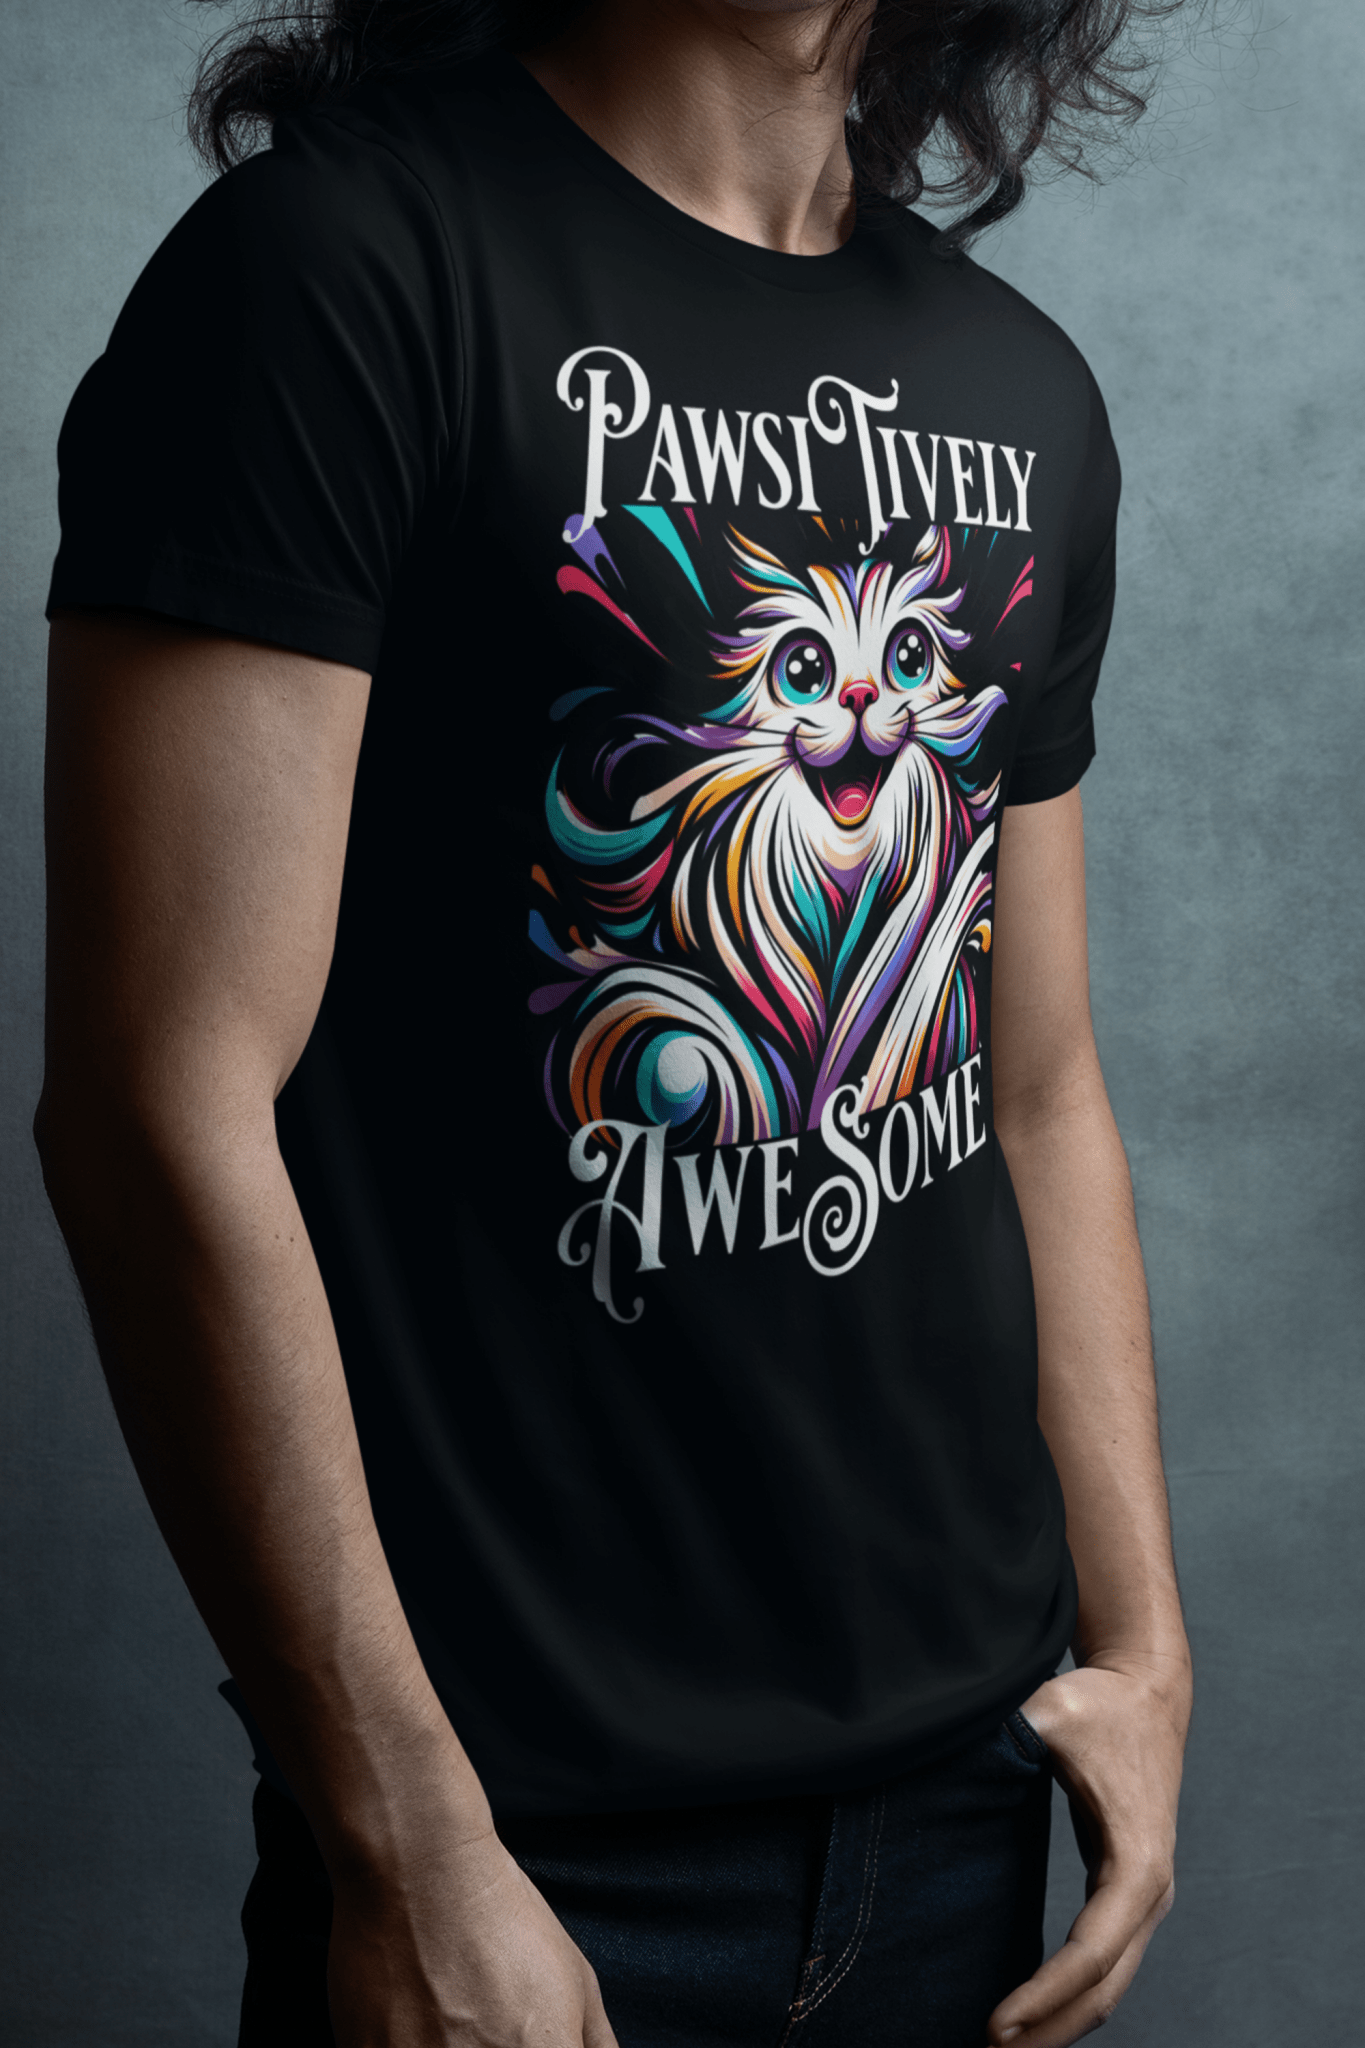 Pawsitively Awesome T-shirt. - InkArt Fashions